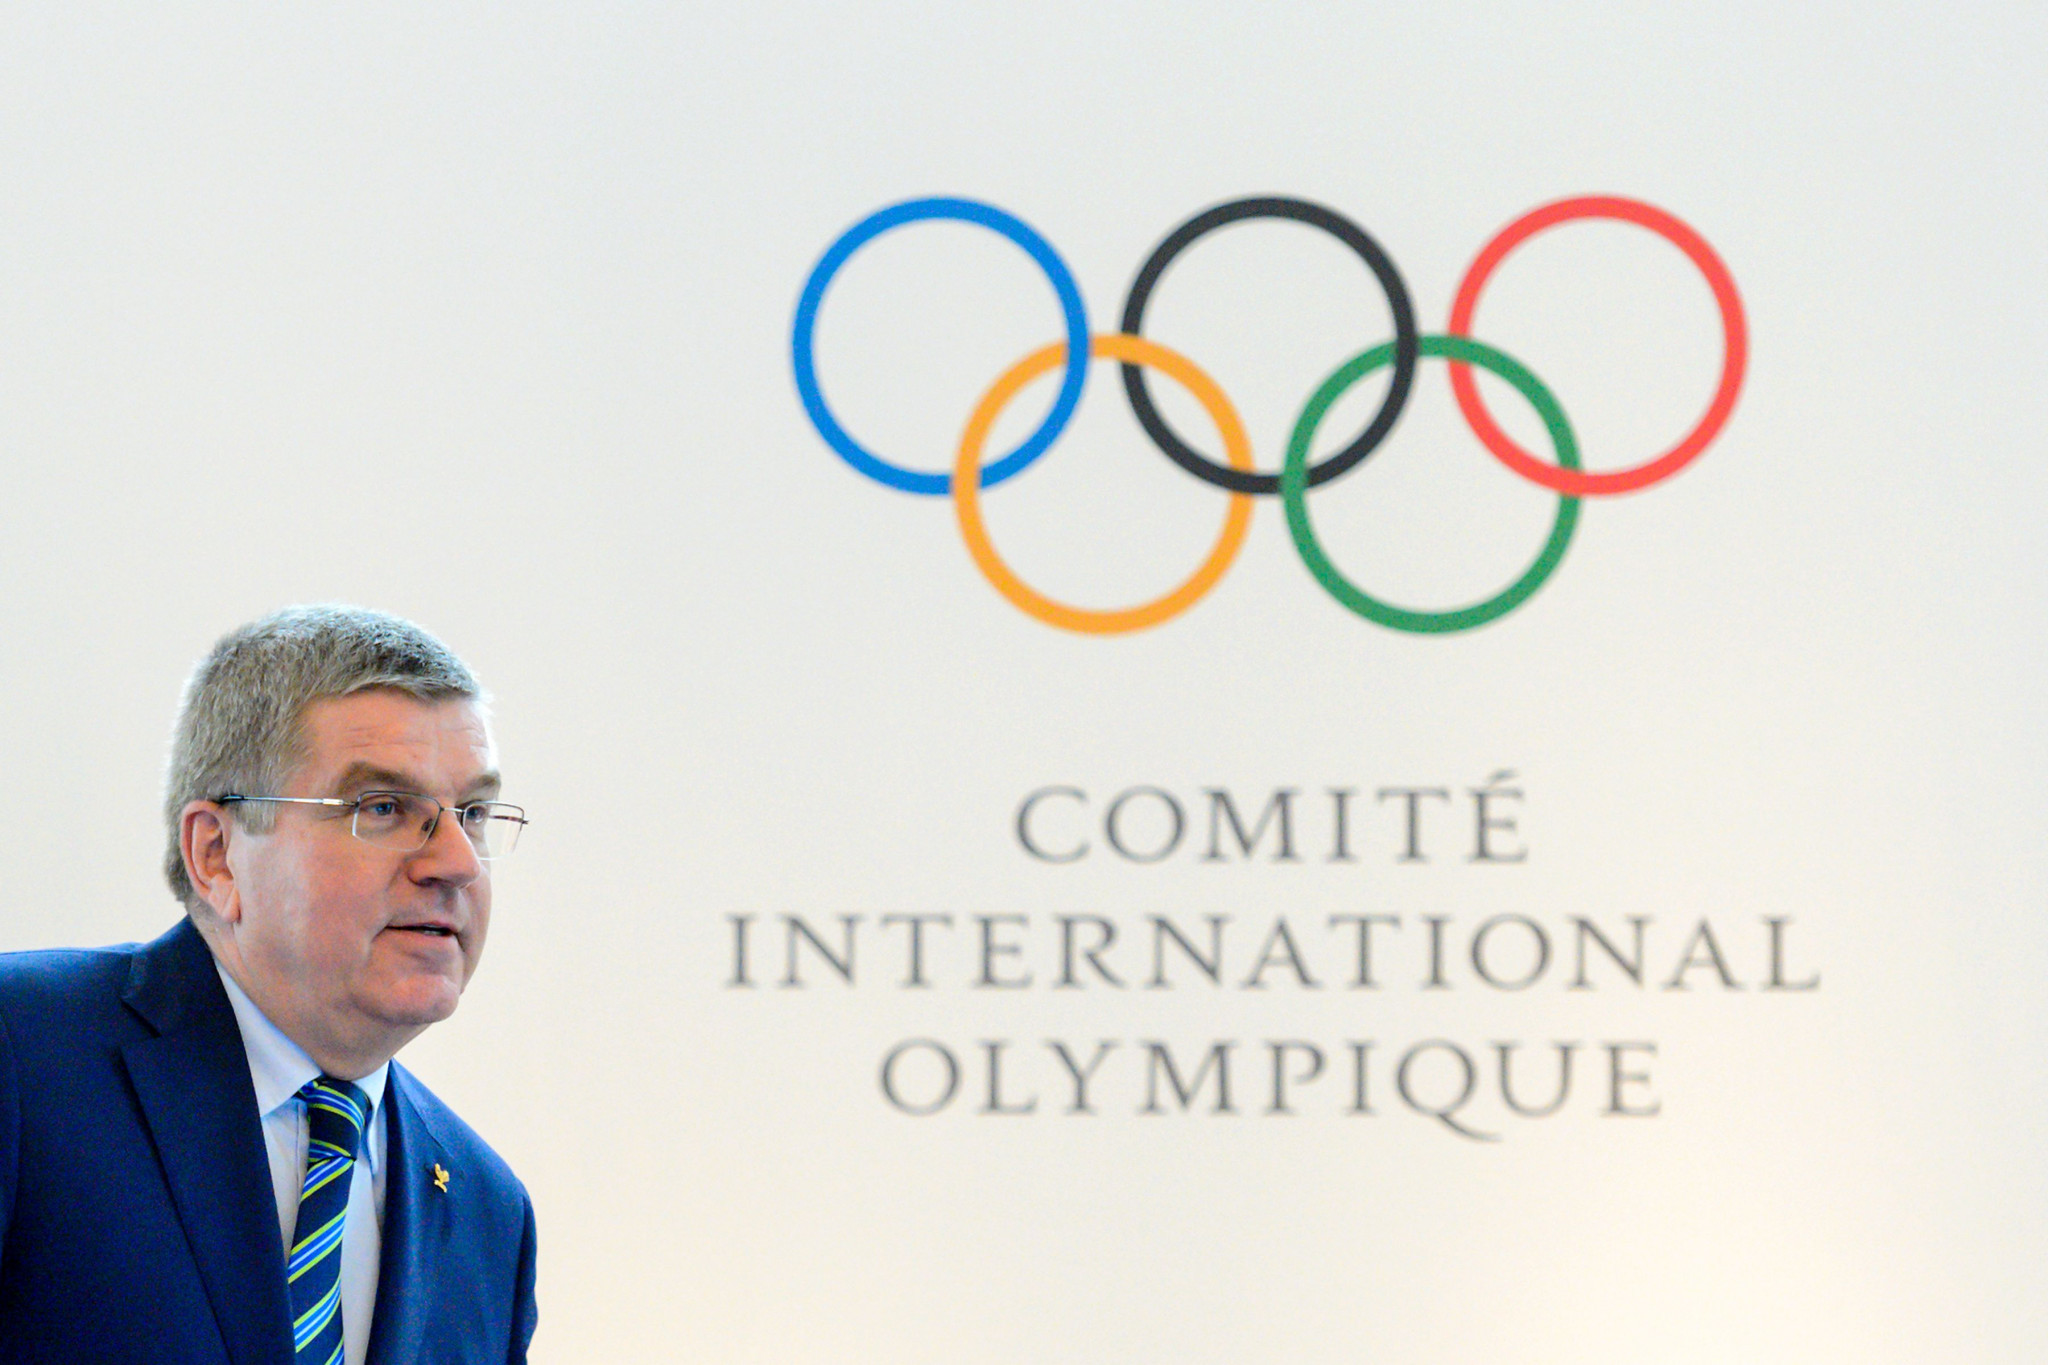 Thomas Bach, pictured speaking after an Olympic Summit in 2016, is expected to chair the meeting tomorrow ©Getty Images